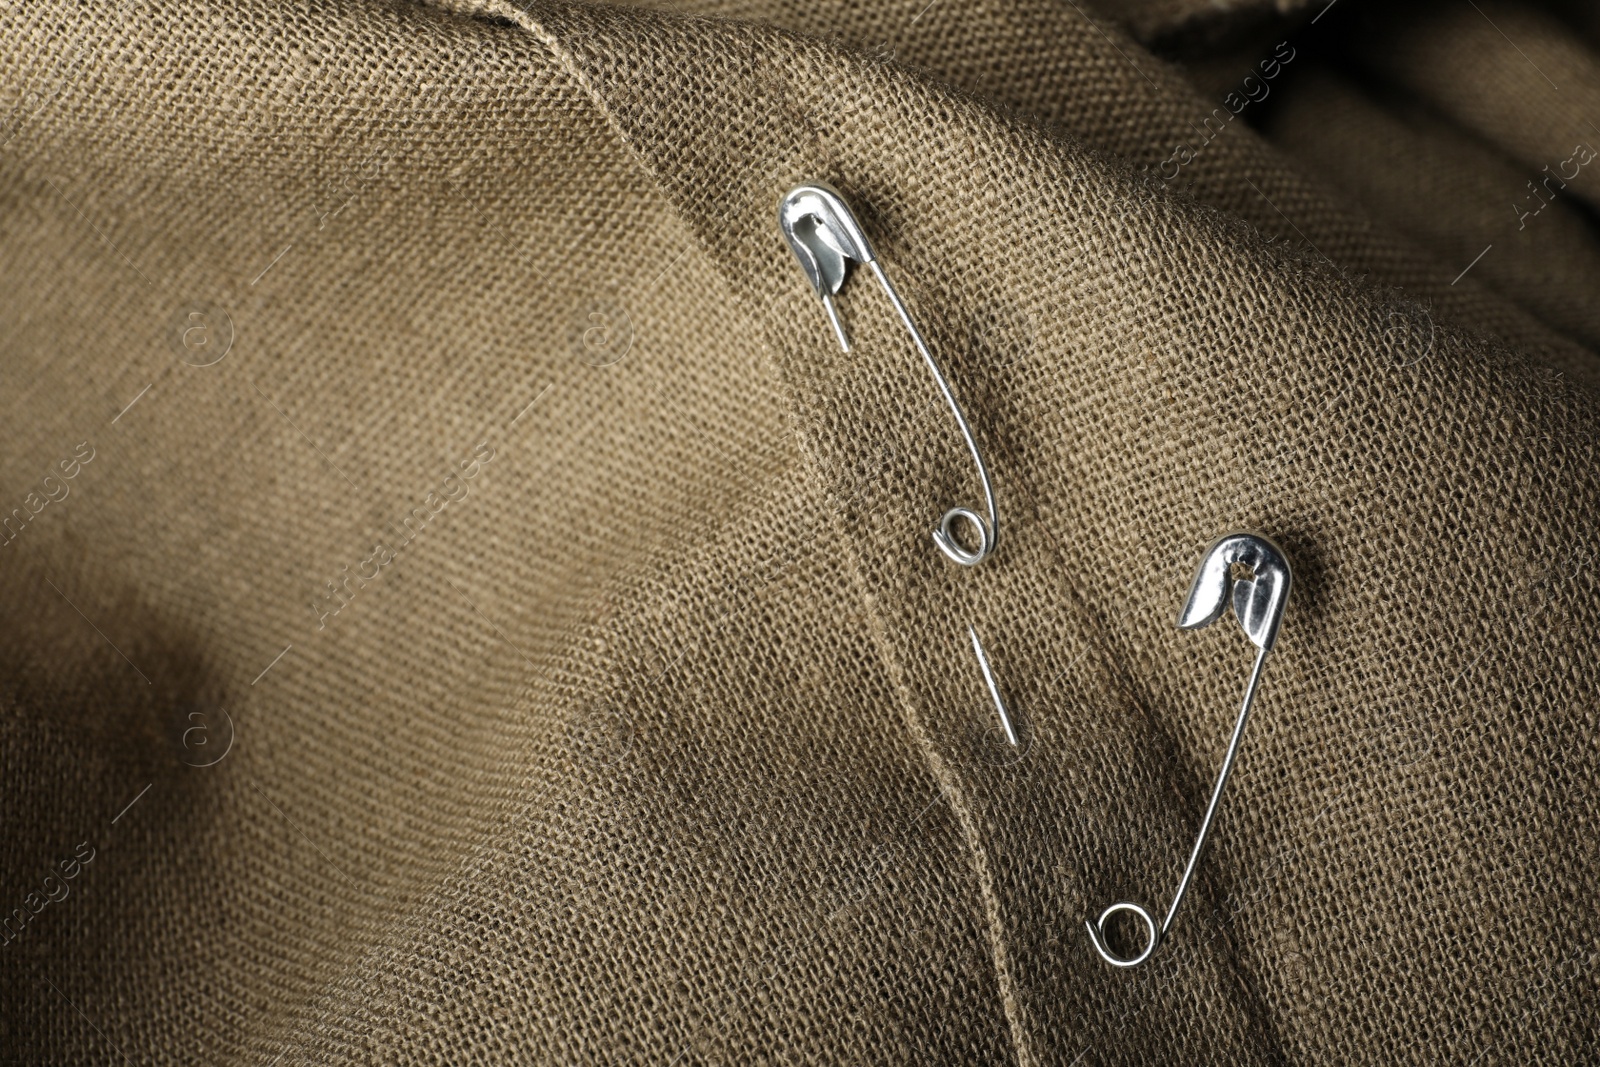 Photo of Metal safety pins on fabric, closeup view